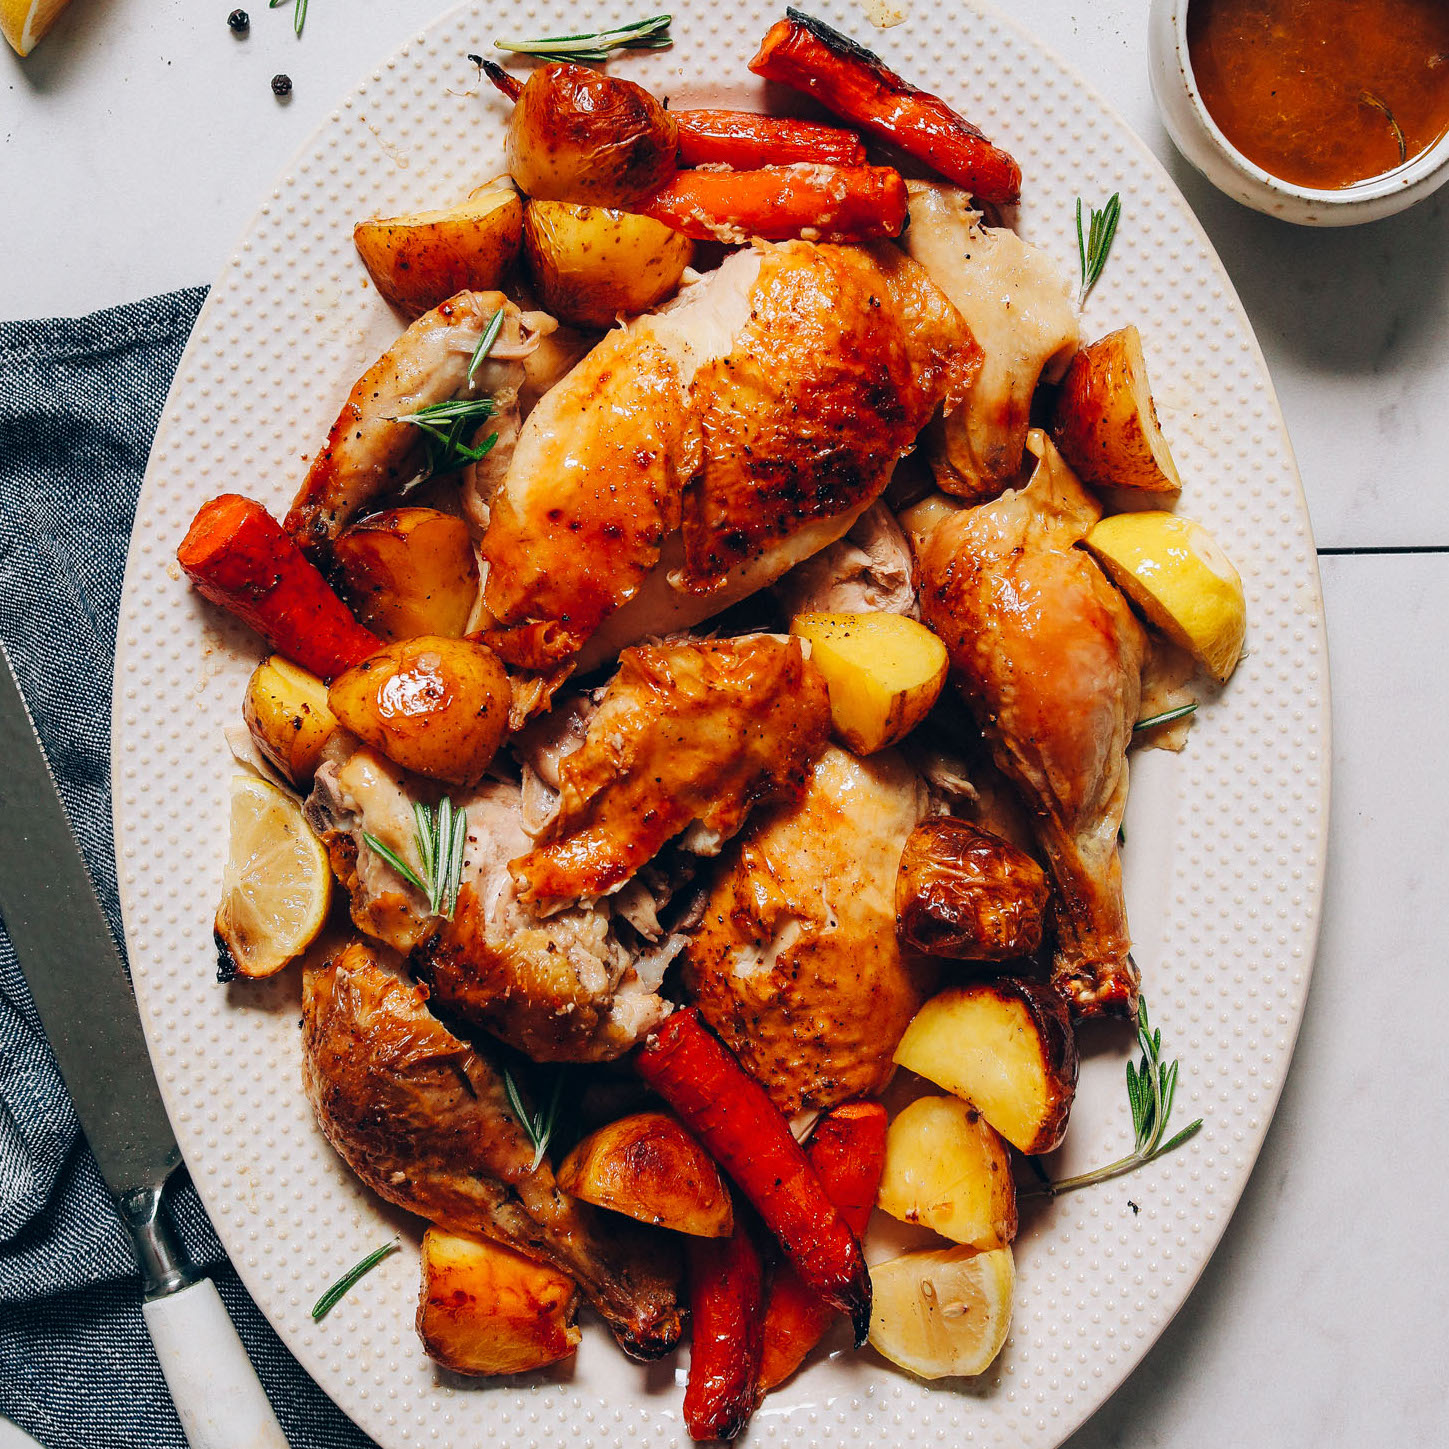 Platter of Oven Roasted Chicken and Roasted Root Vegetables with rosemary